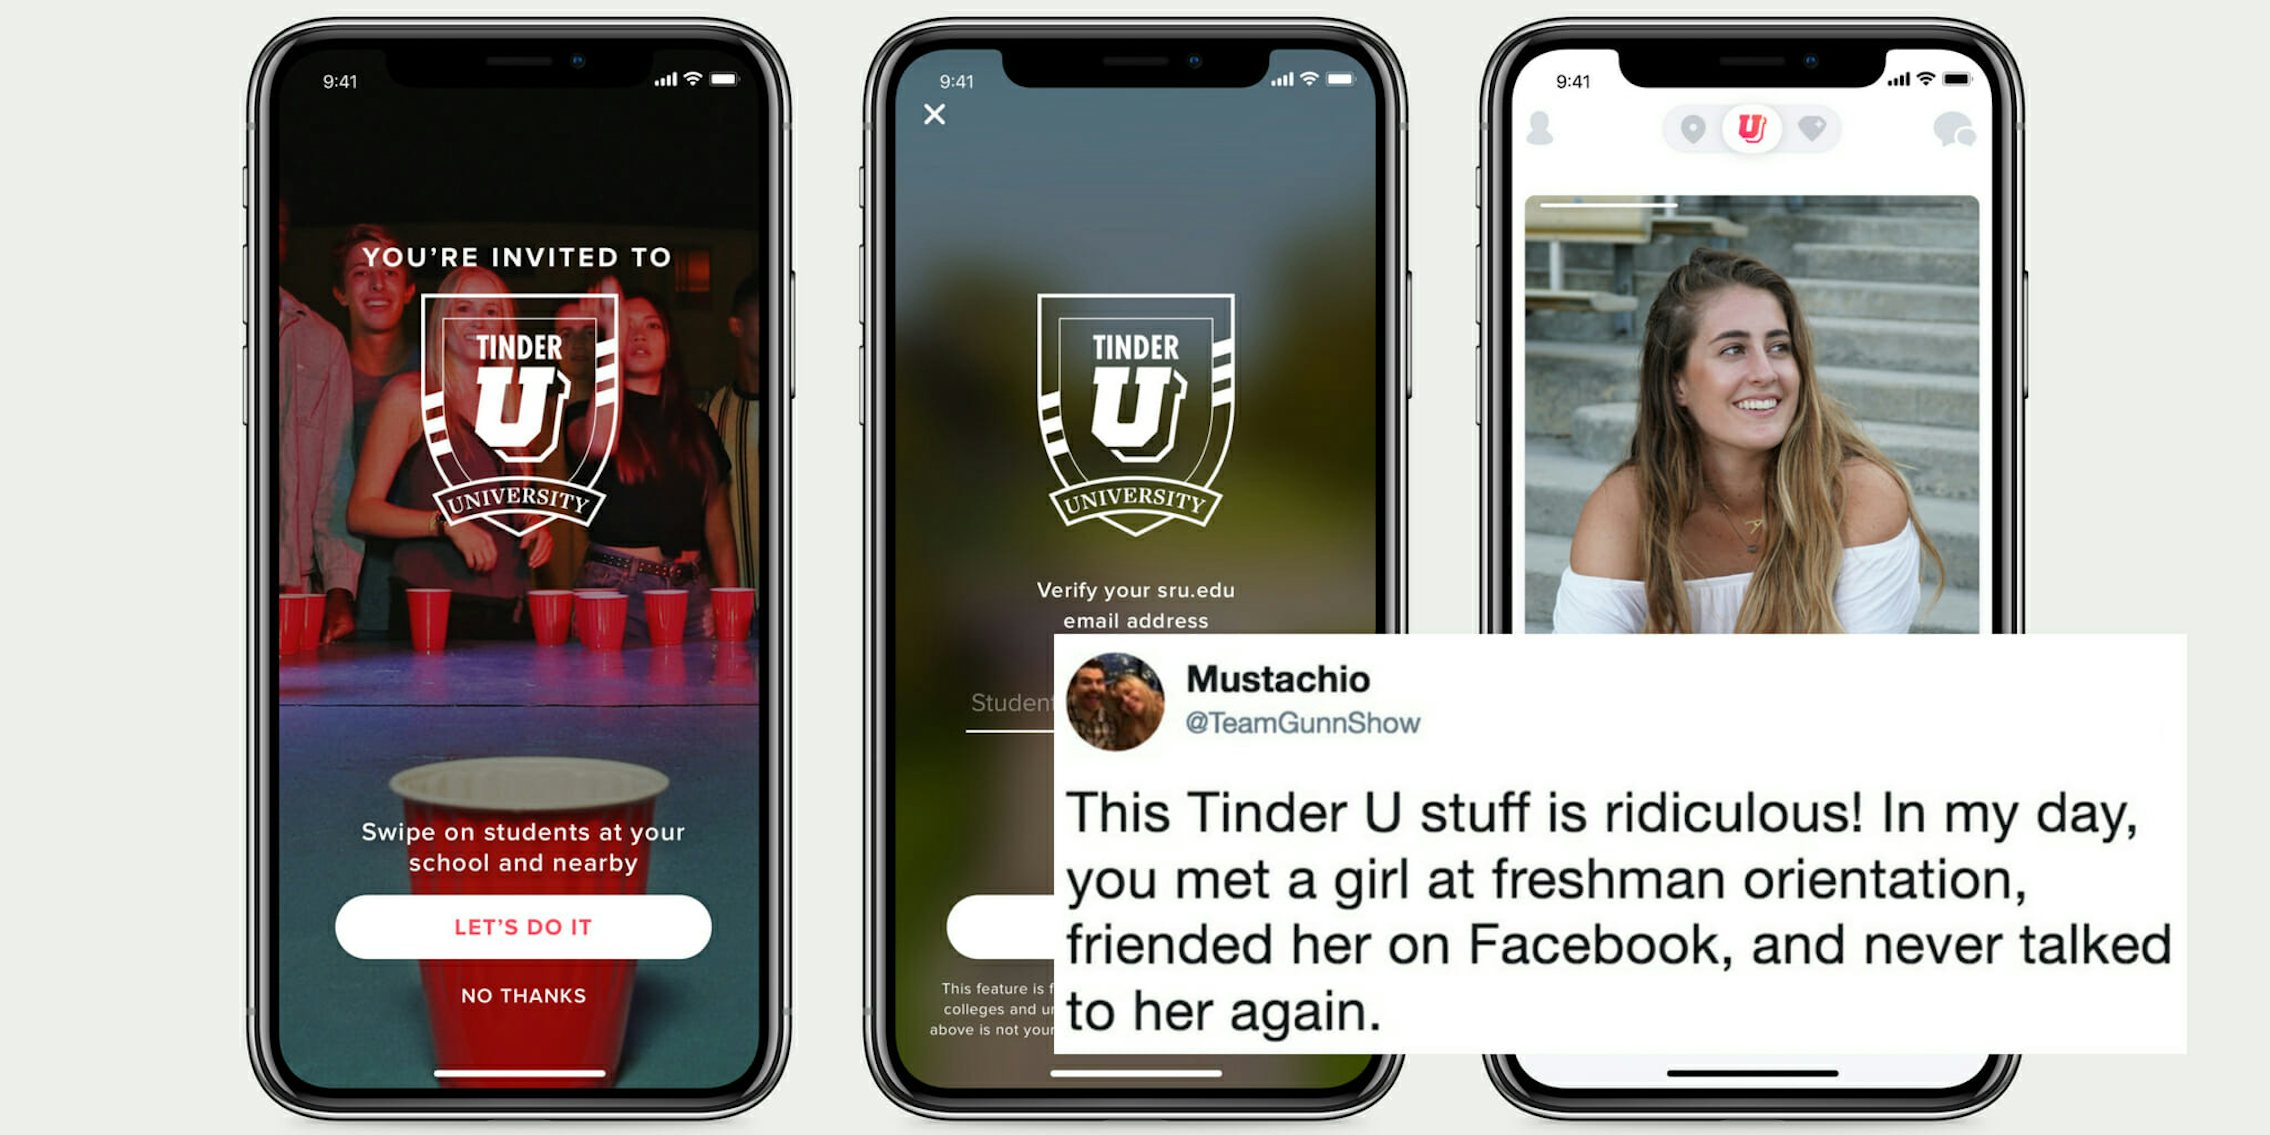 The Tinder U interface for college students.